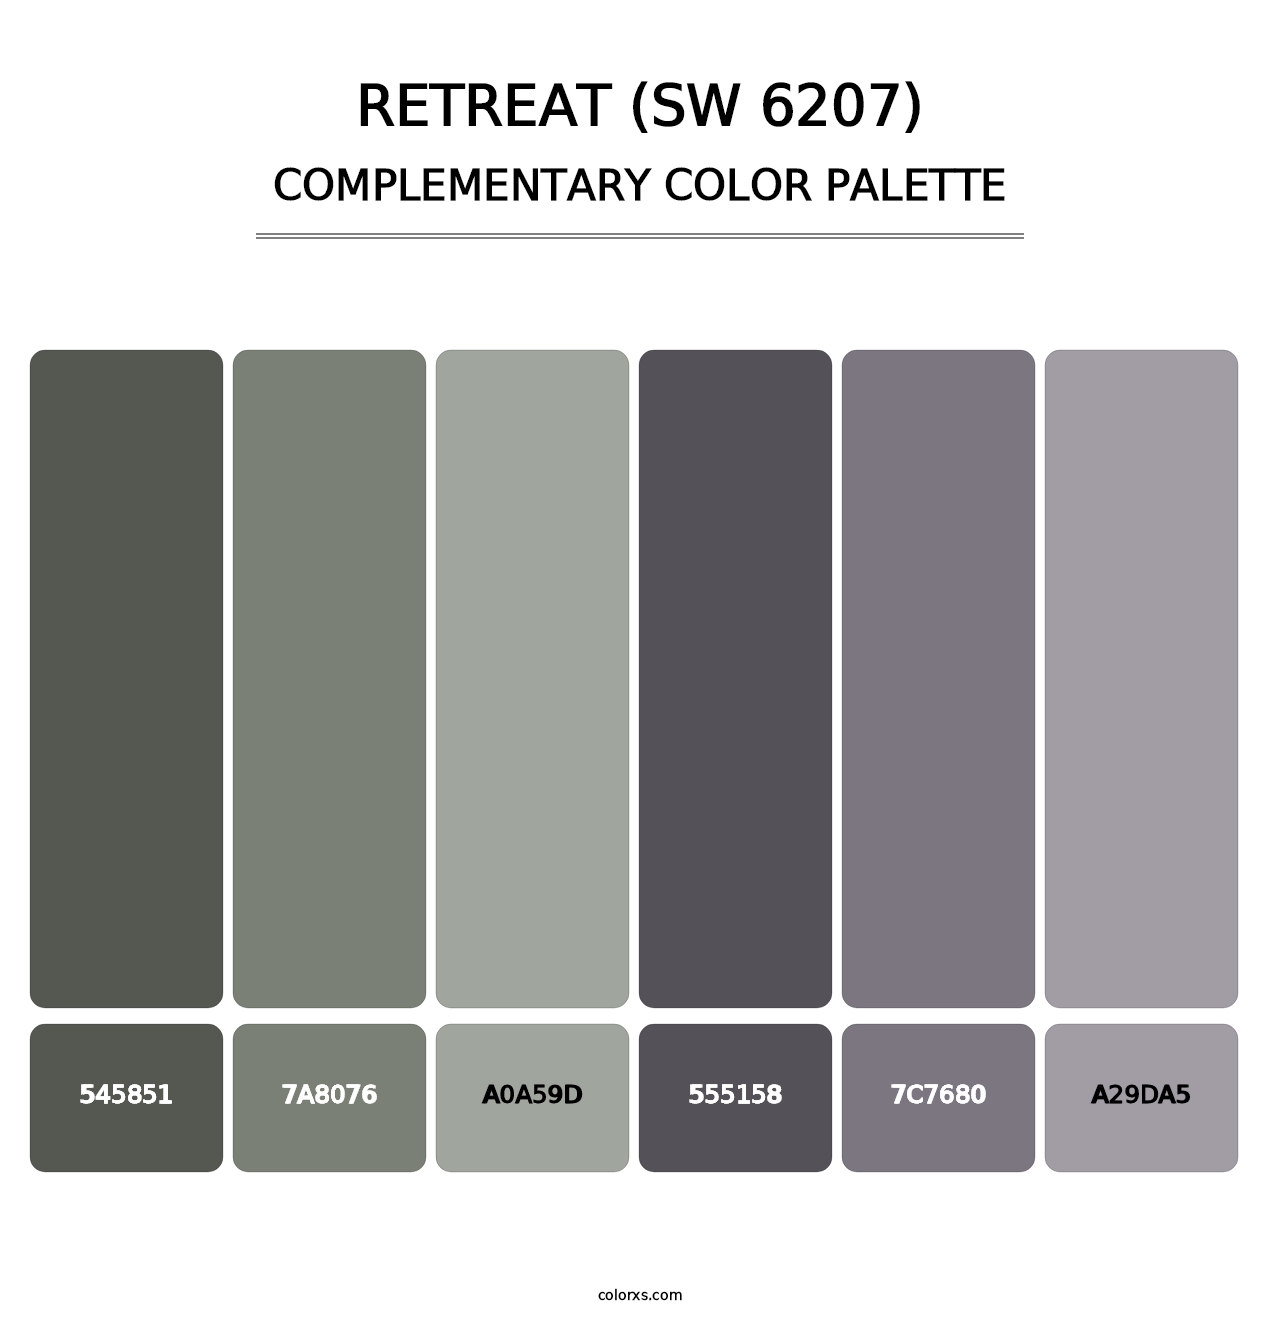 Retreat (SW 6207) - Complementary Color Palette